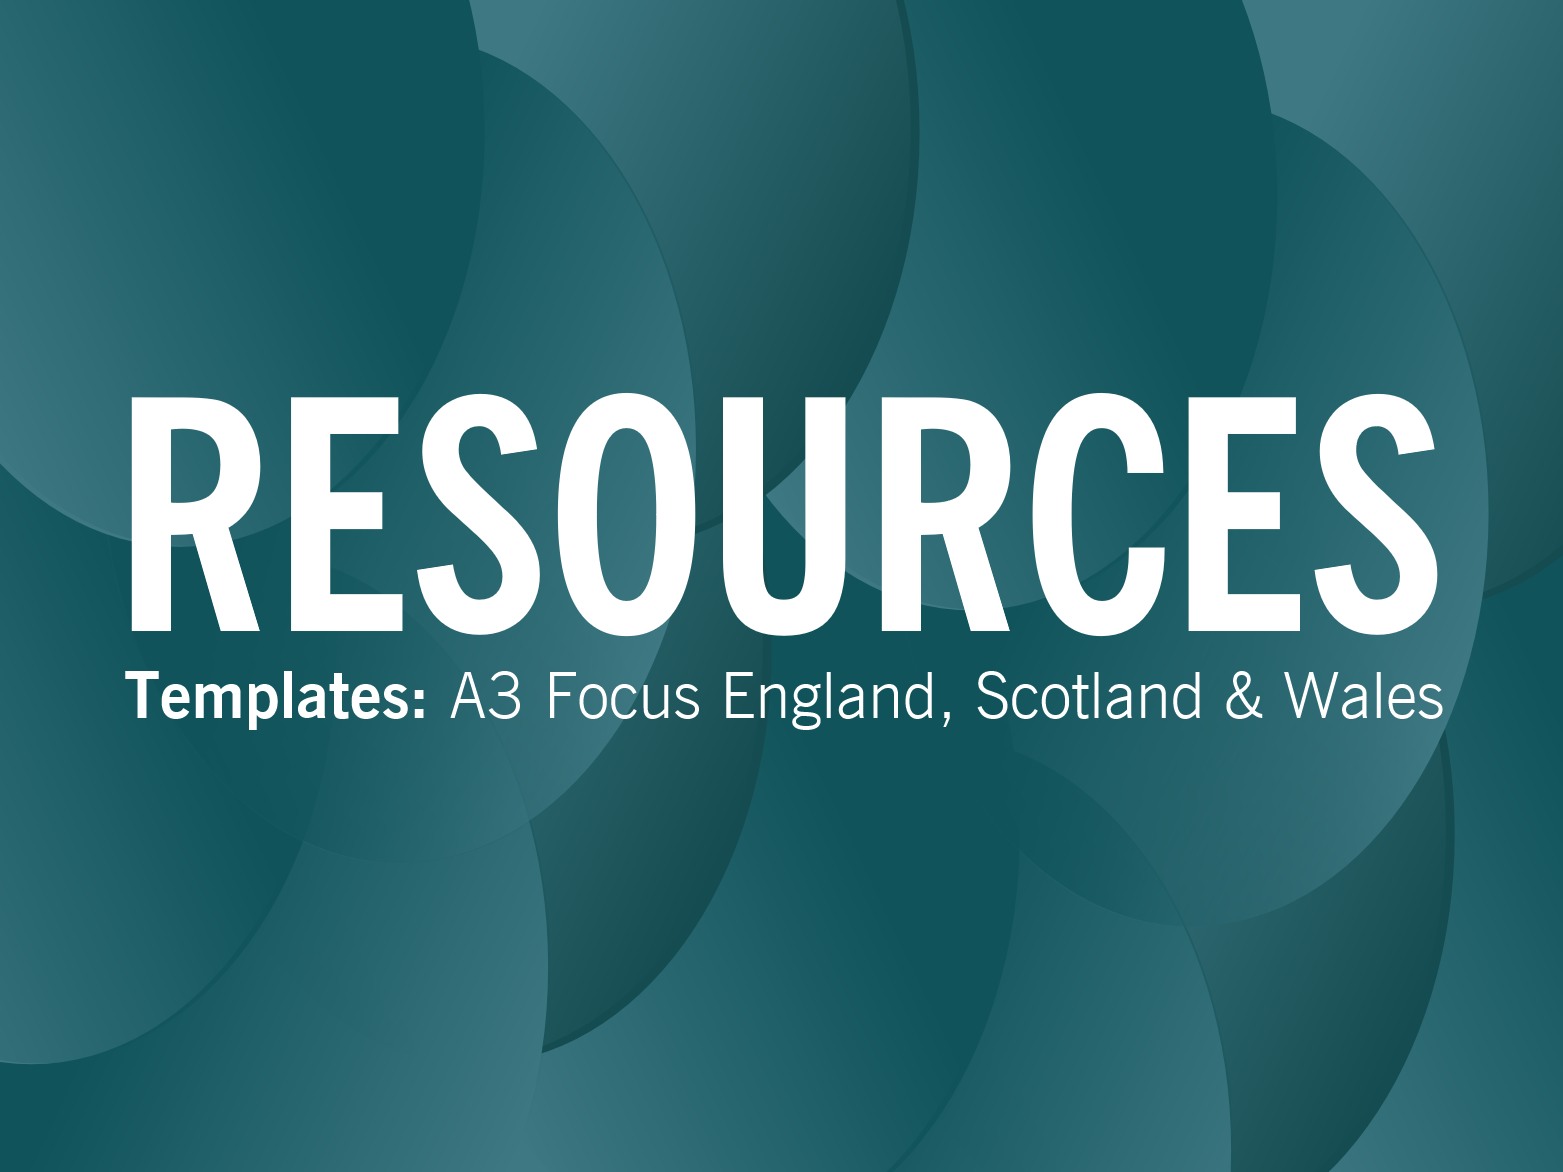 RESOURCE: New A3 Focus Templates